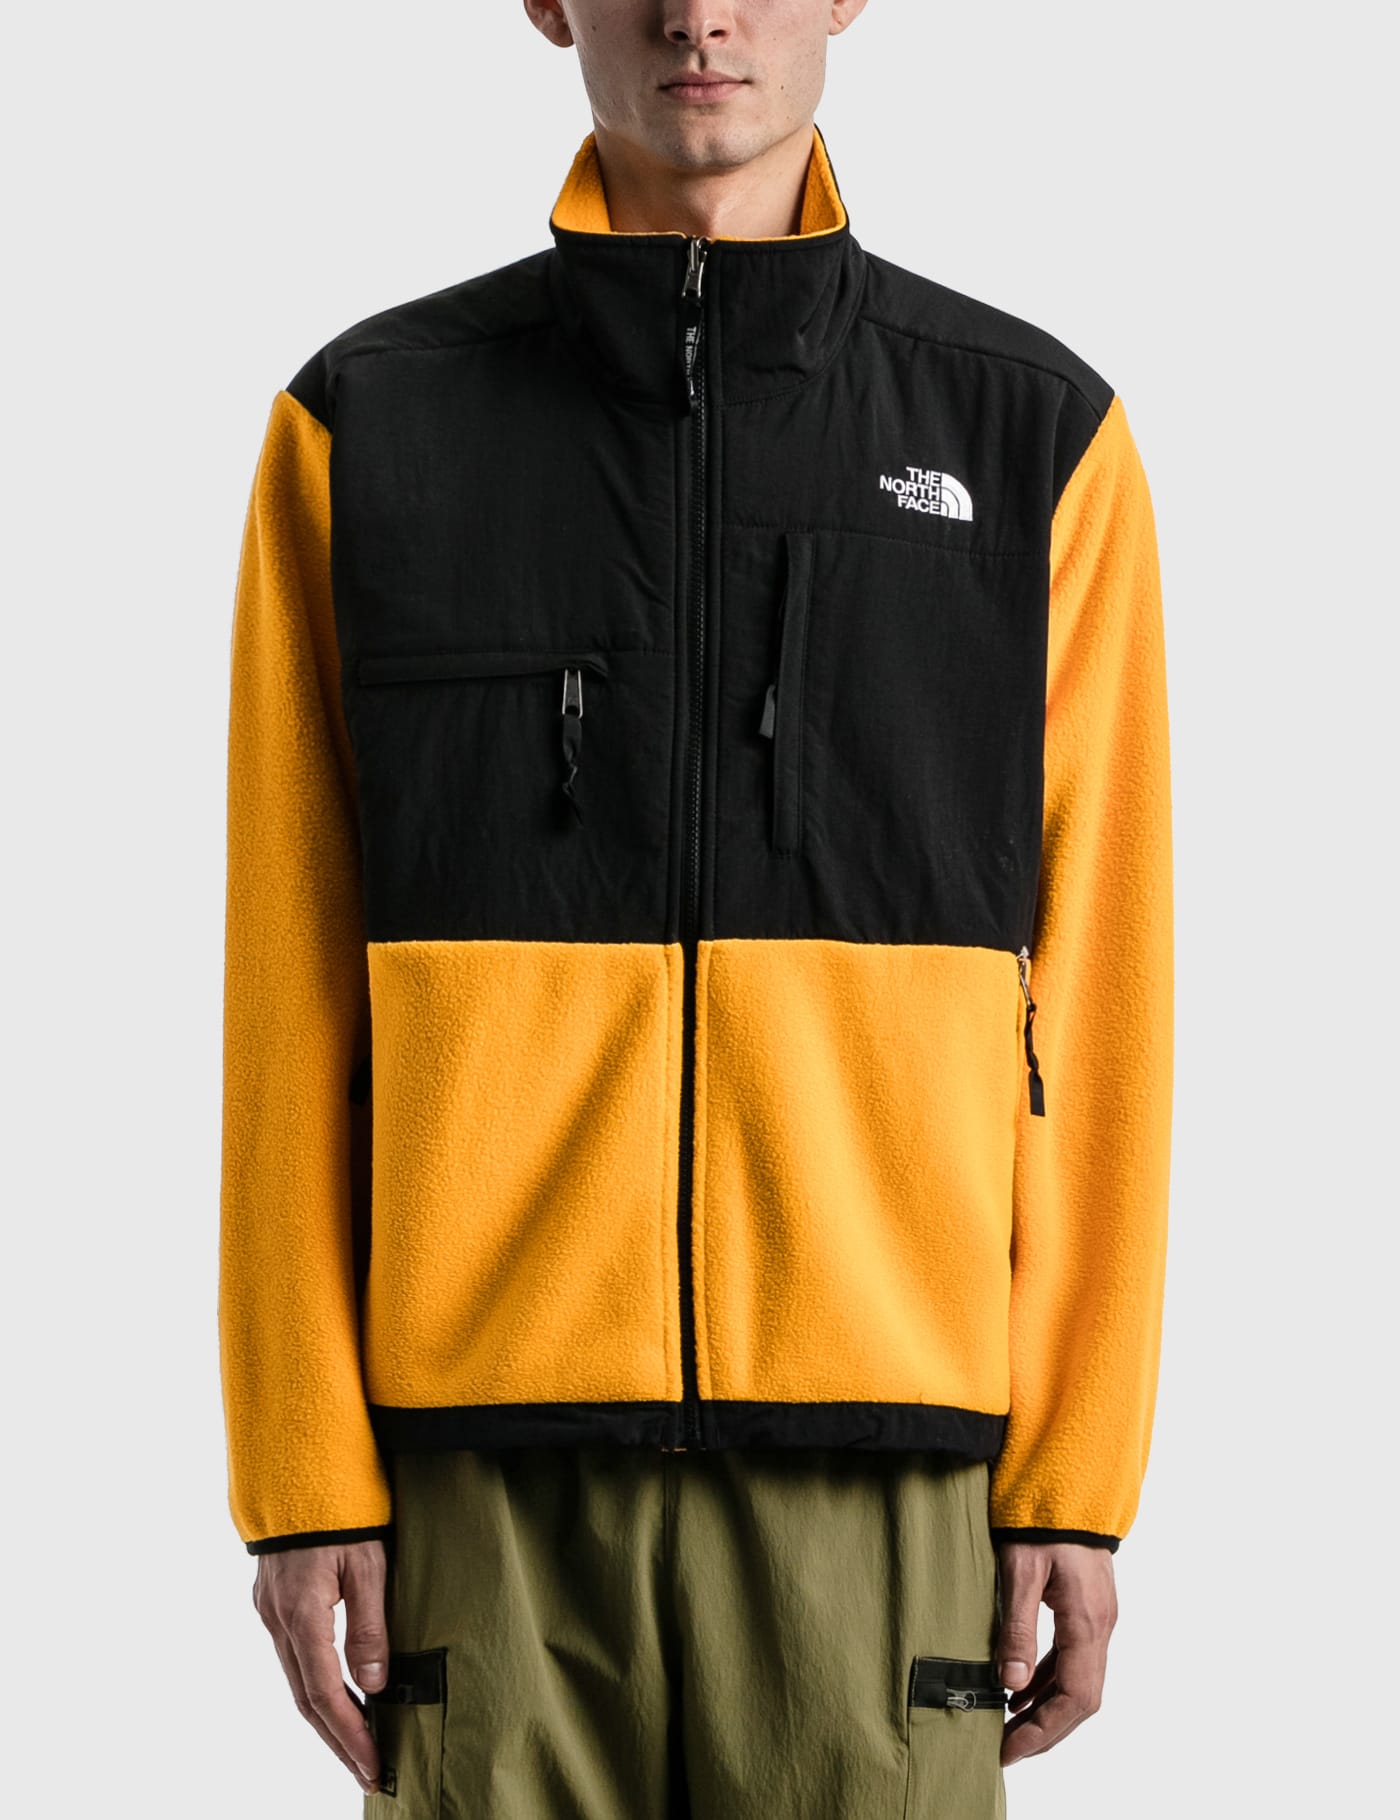 north face jacket store